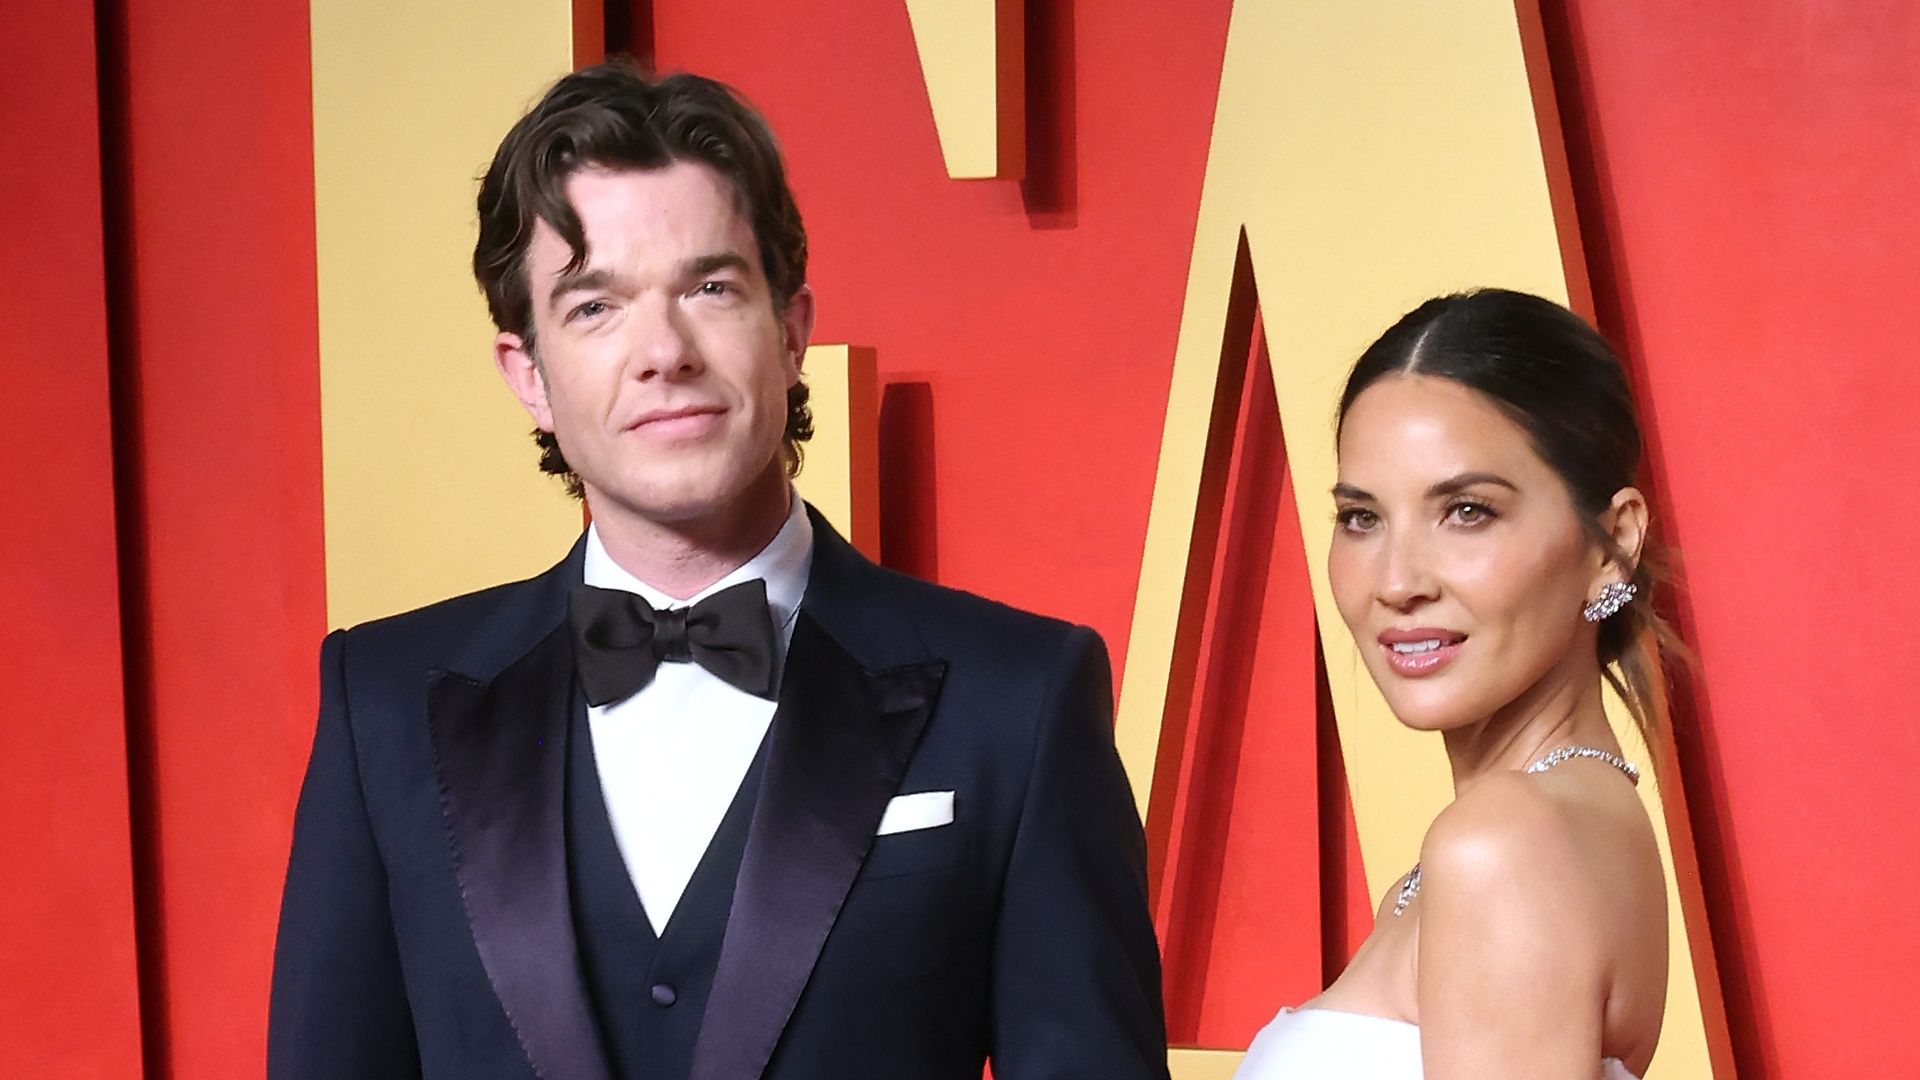 Olivia Munn recalls 'bawling' over results of 'scary' egg retrieval with John Mulaney: 'Just want one more baby'